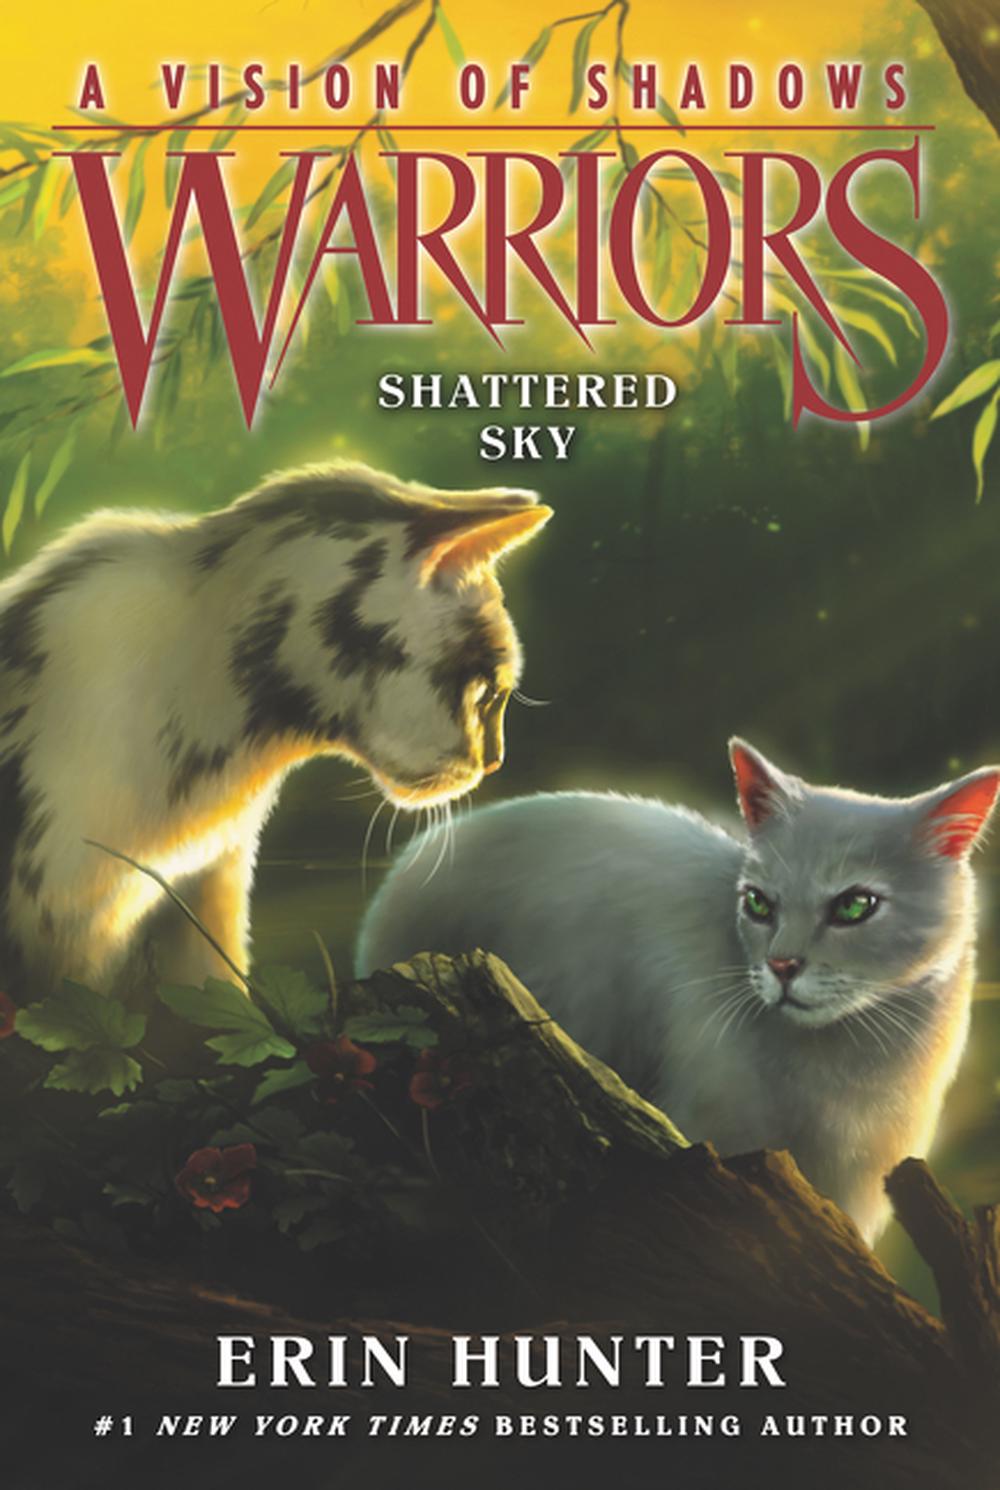 warriors books vision of shadows book 3